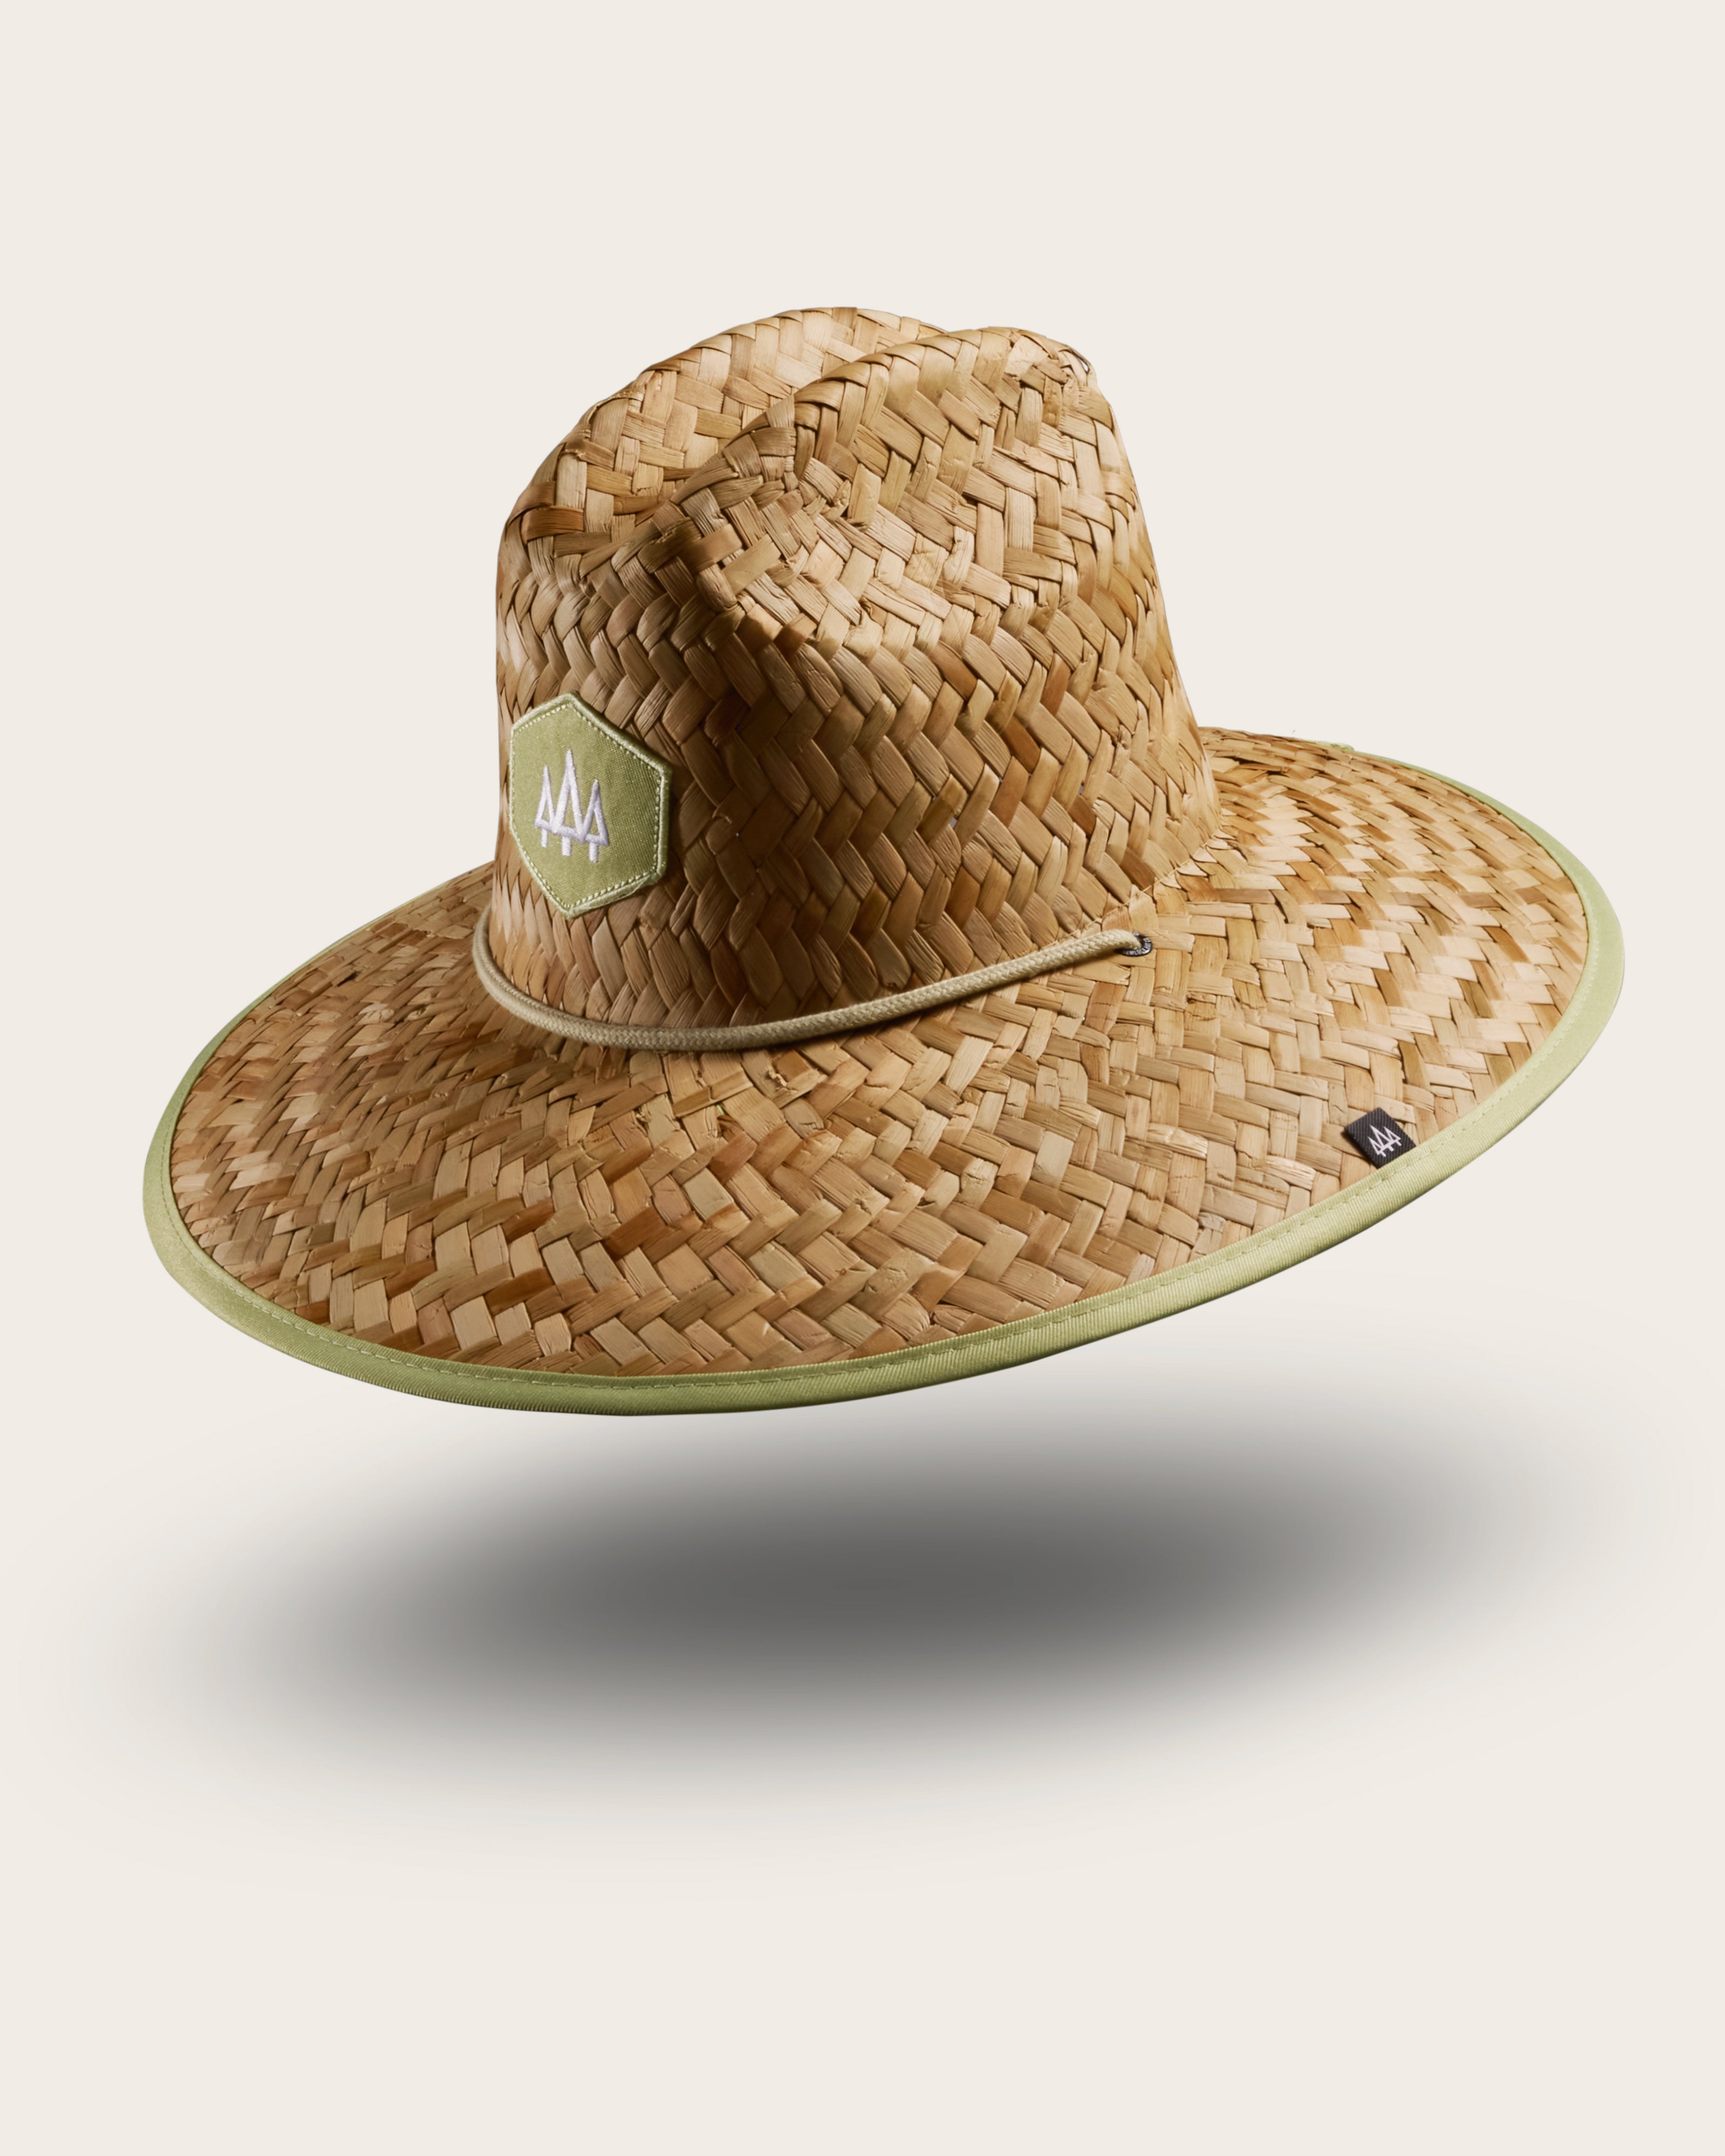 Hemlock Pistachio straw lifeguard hat with green color with patch